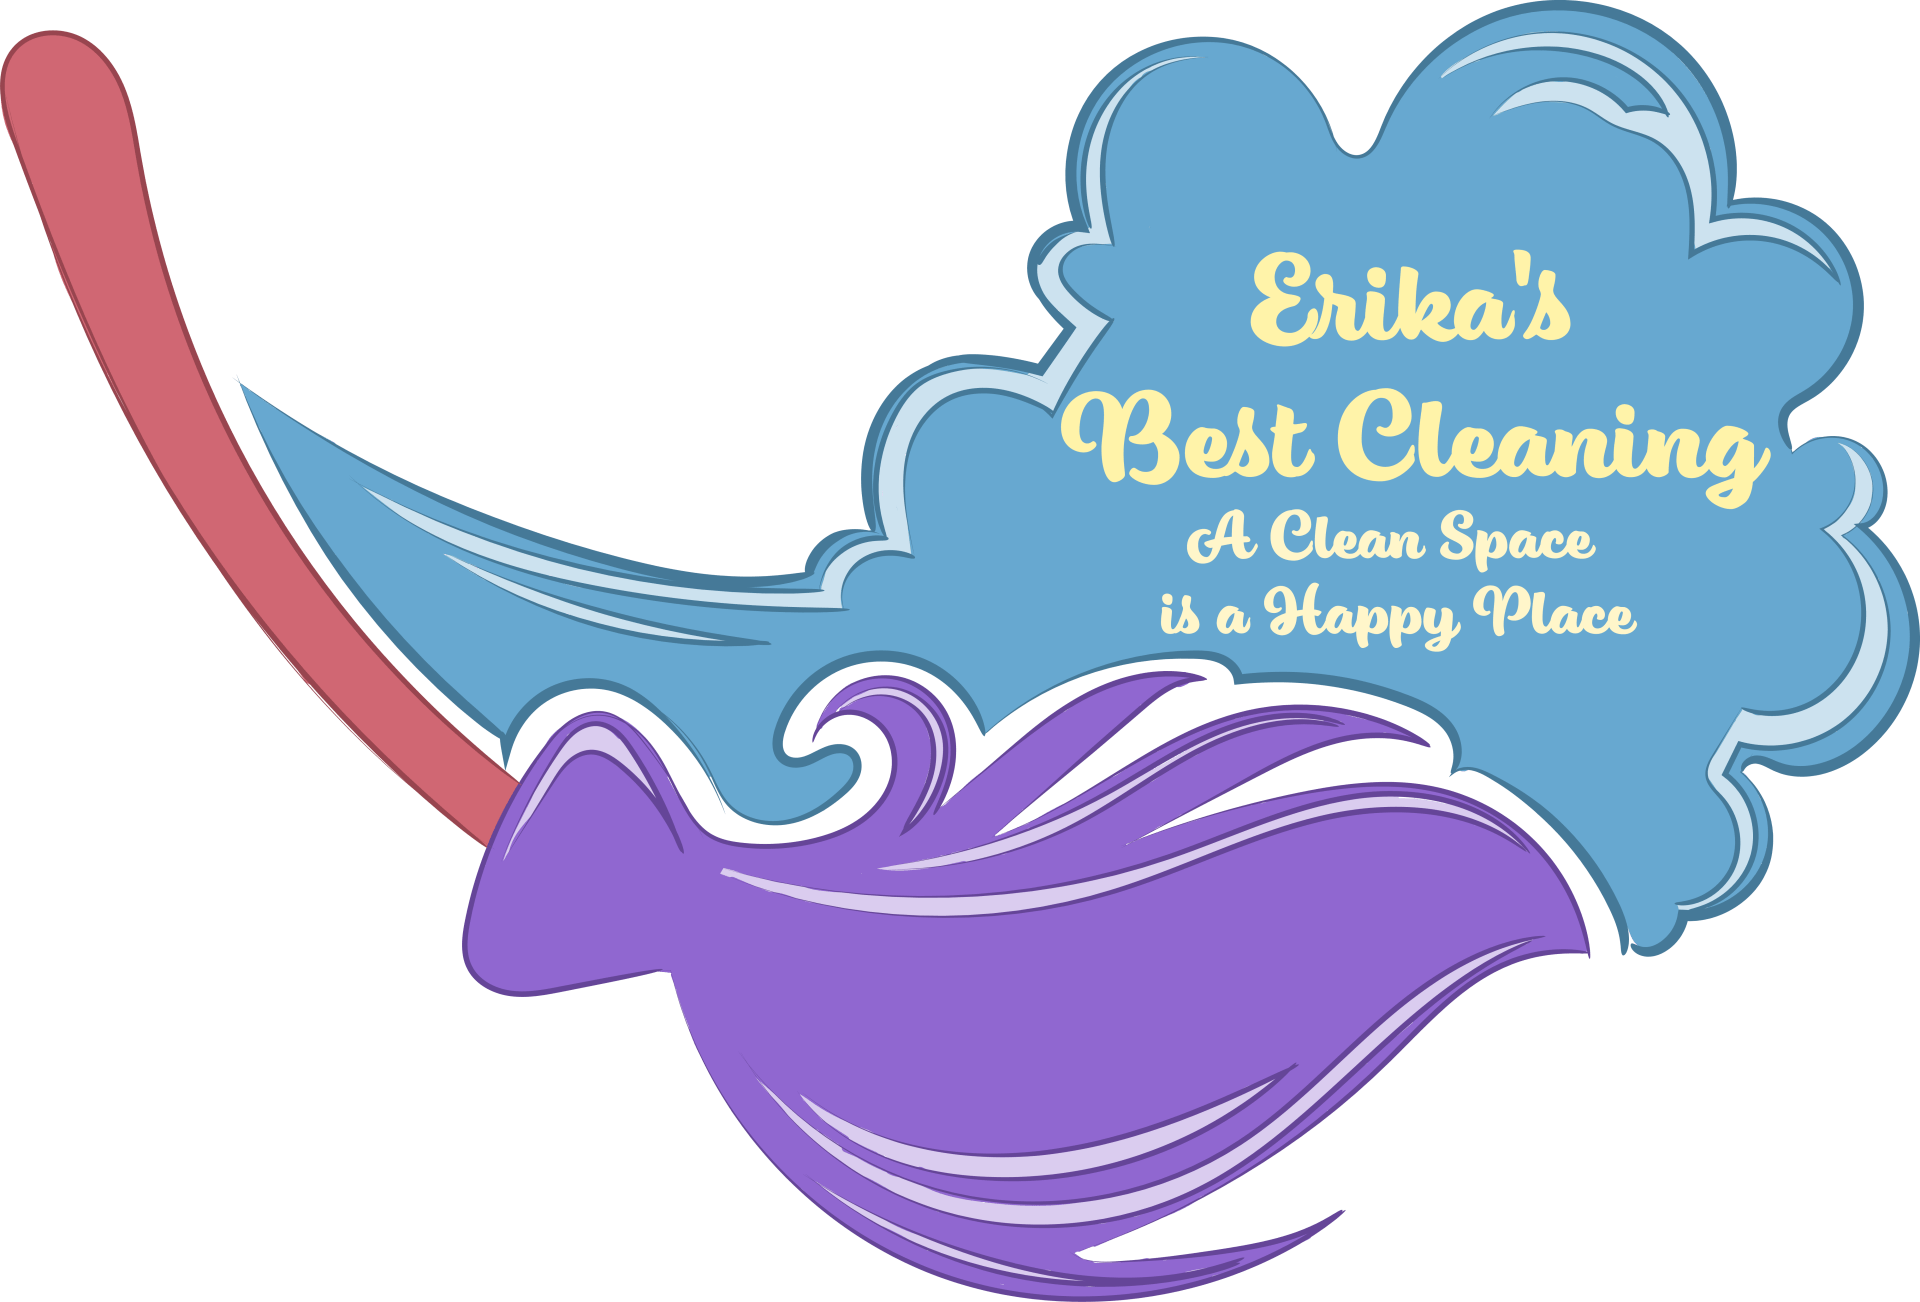 House Cleaning Service in Watertown, CT | Erikas Best Cleaning